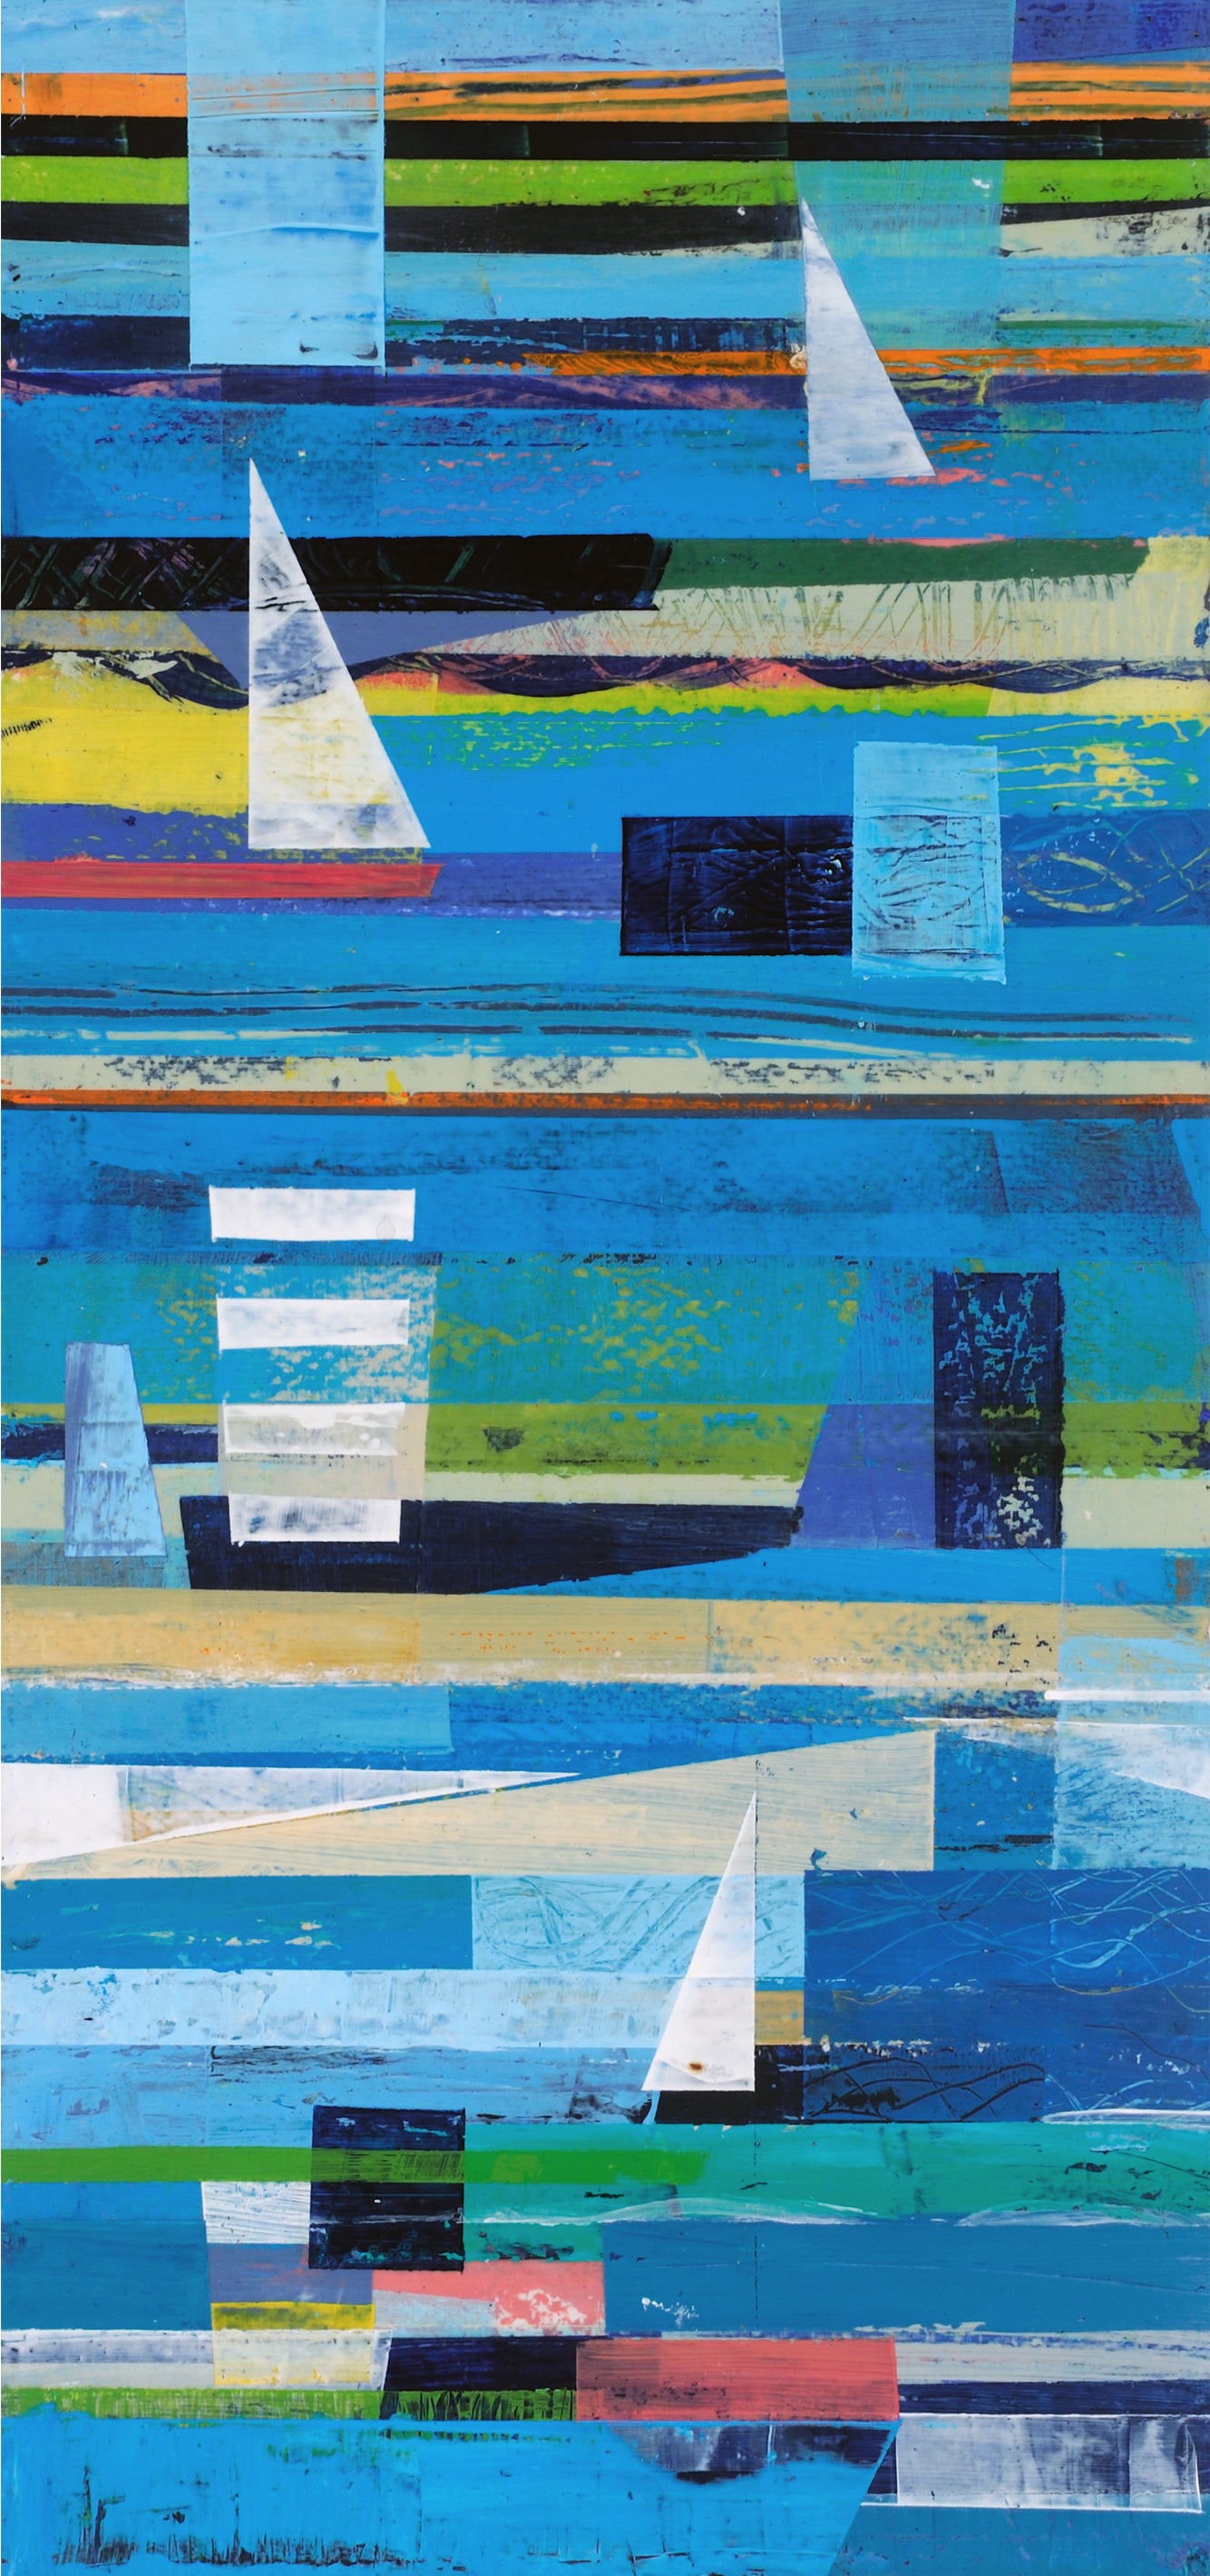 Beachy abstract painting with sails and stripes